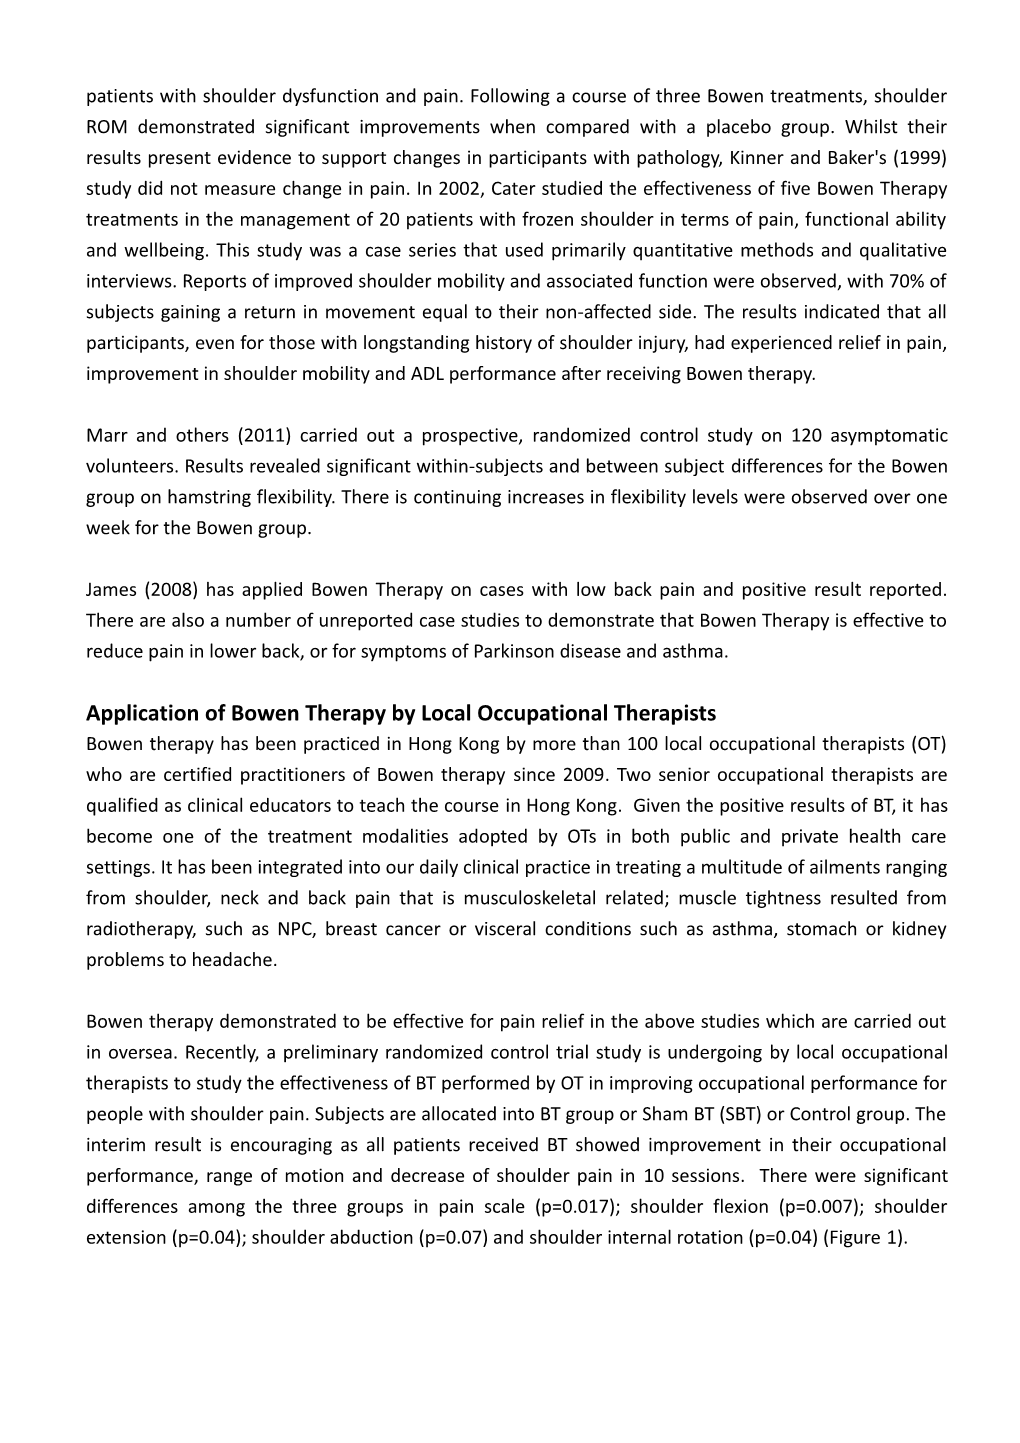 Bowen Therapy a New Treatment Modality for Pain Management in Occupational Therapy